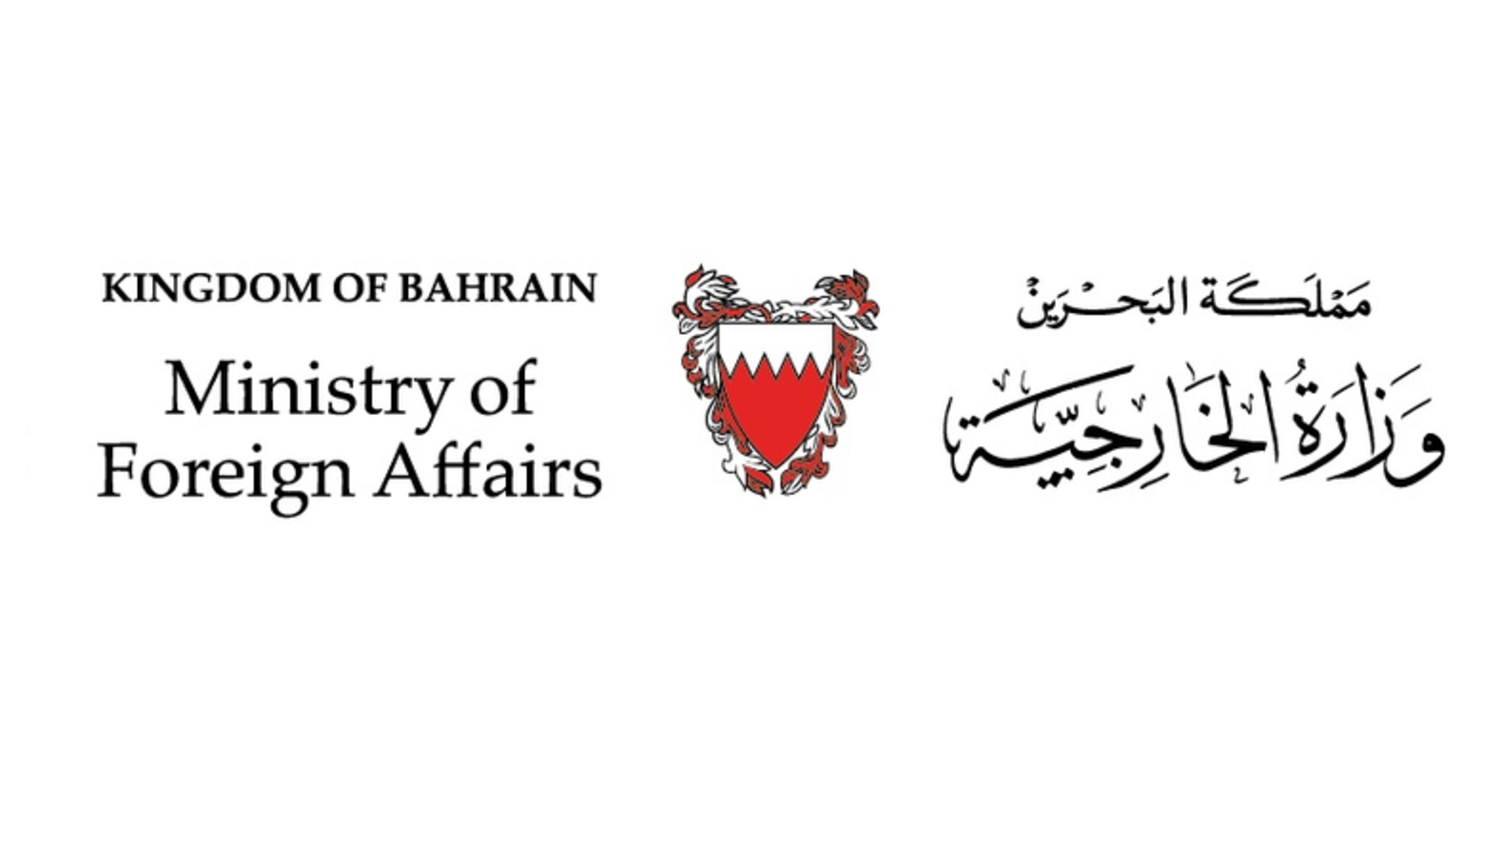 Bahrain: Our Legislative, Judicial Systems Protect Human Rights